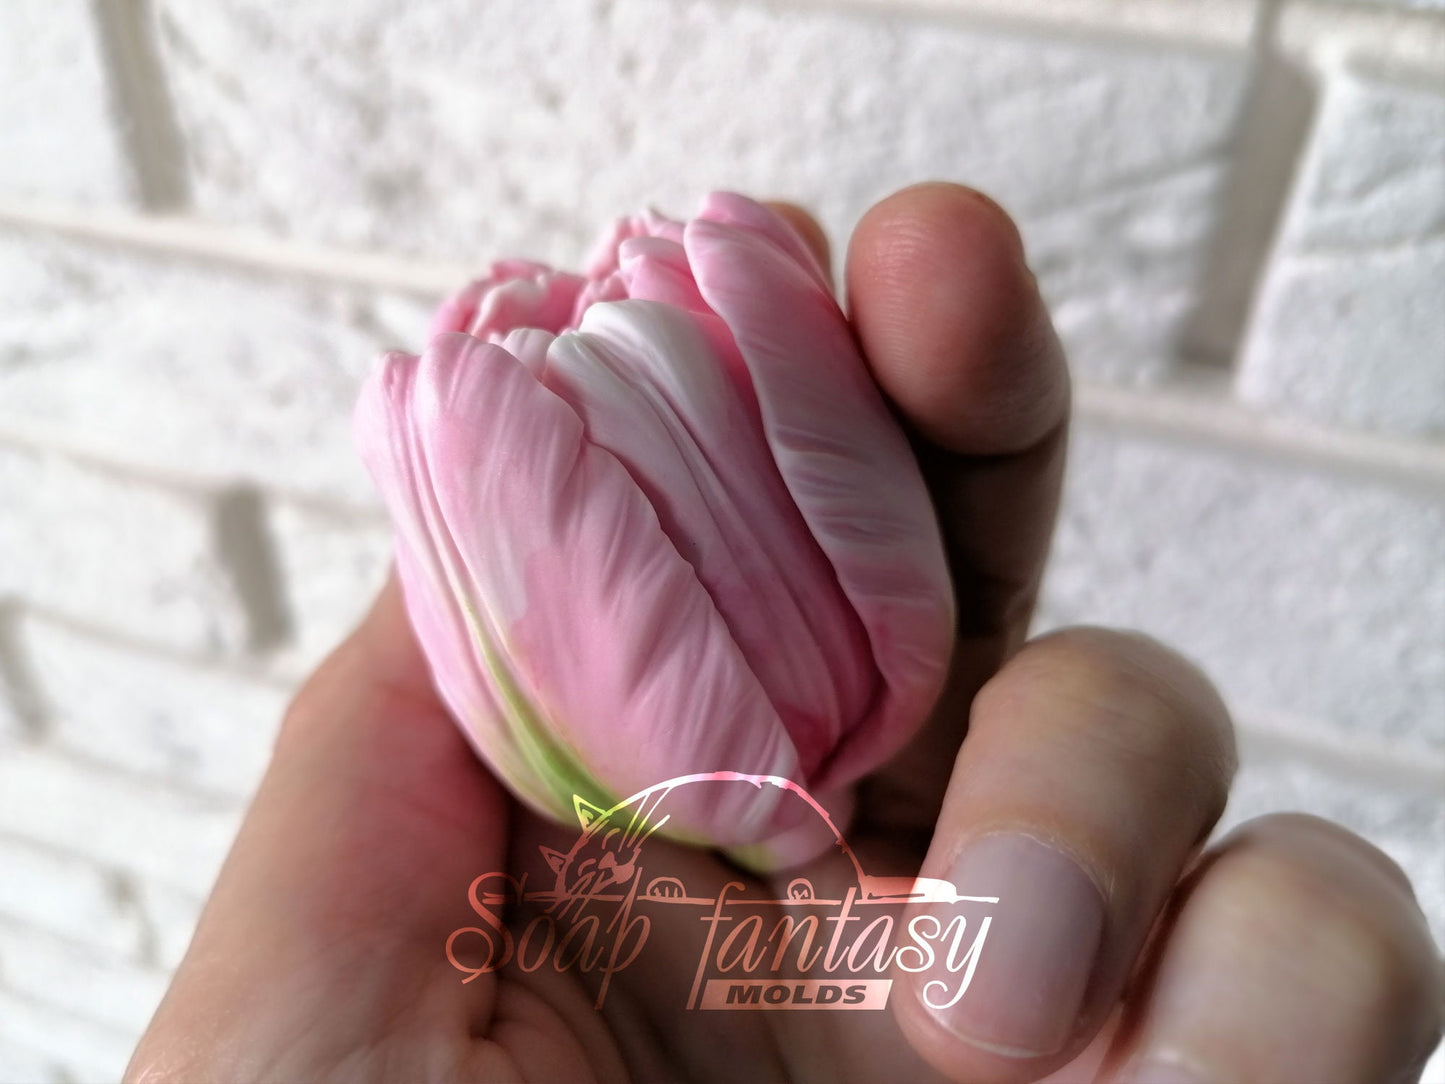 Tulip "Sweetheart" silicone mold for soap making